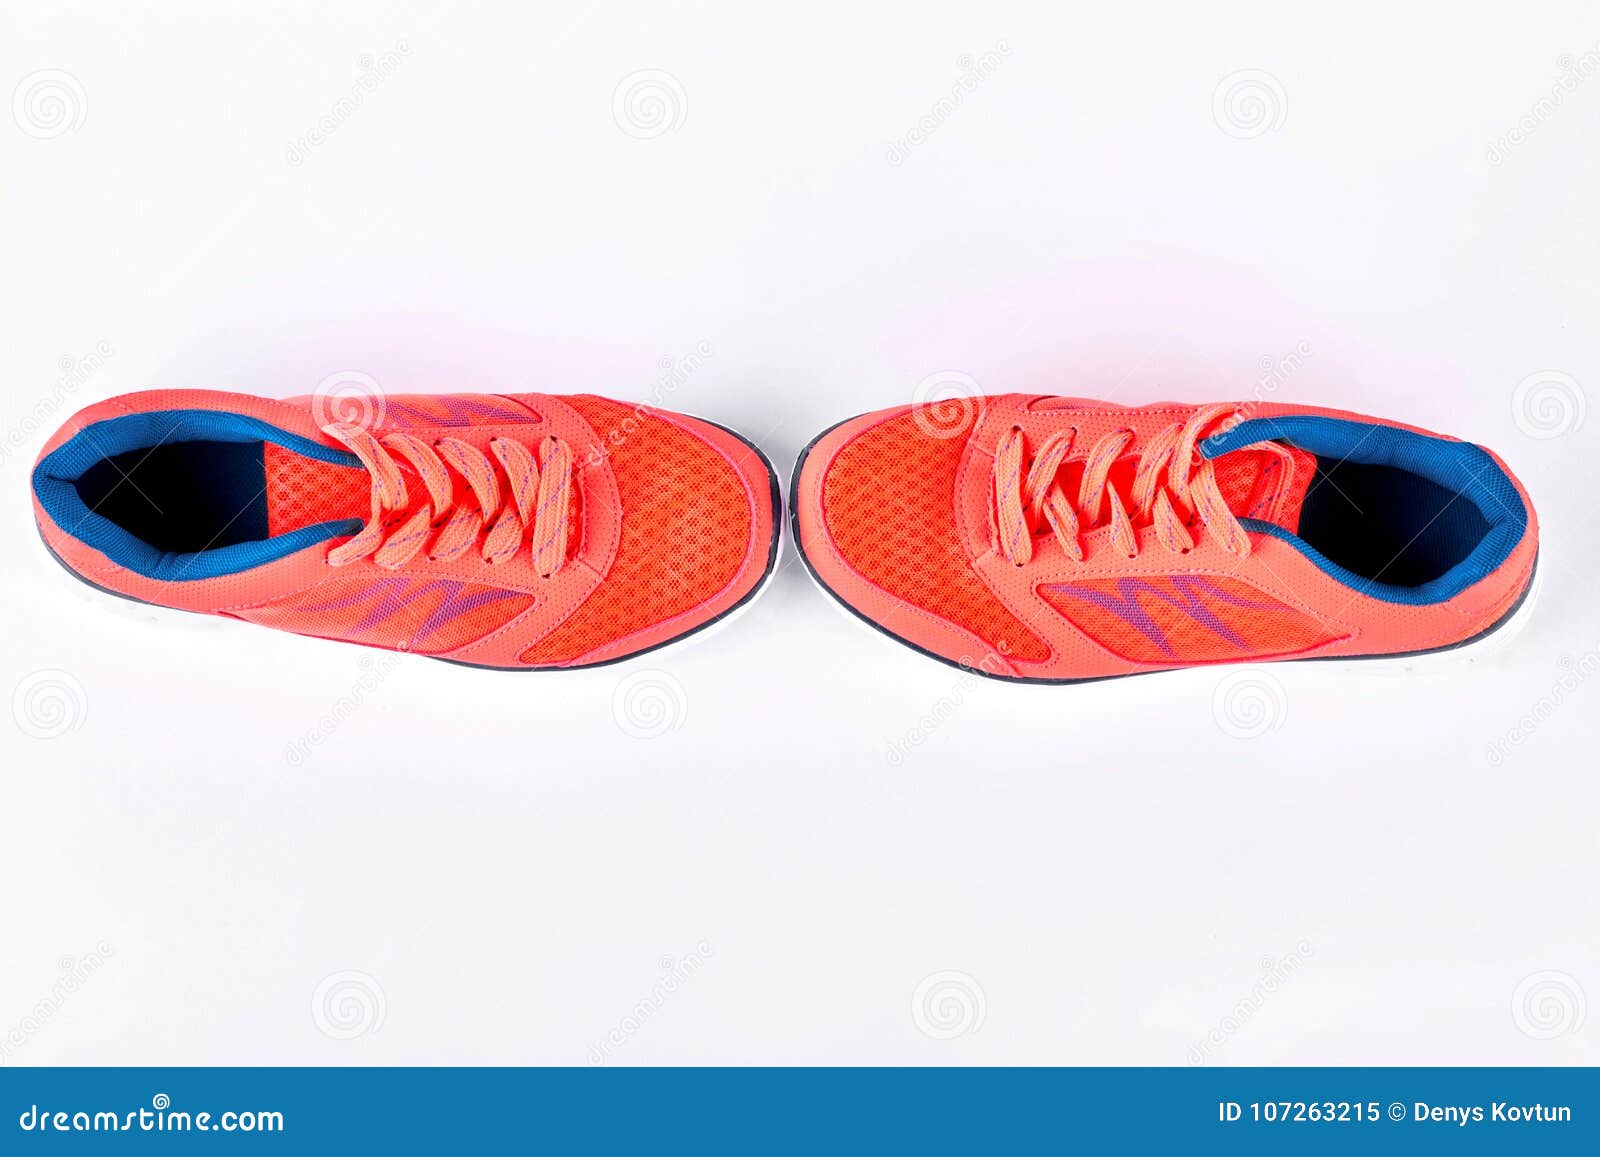 Pair of Sport Shoes, Top View. Stock Image - Image of clothing, color ...